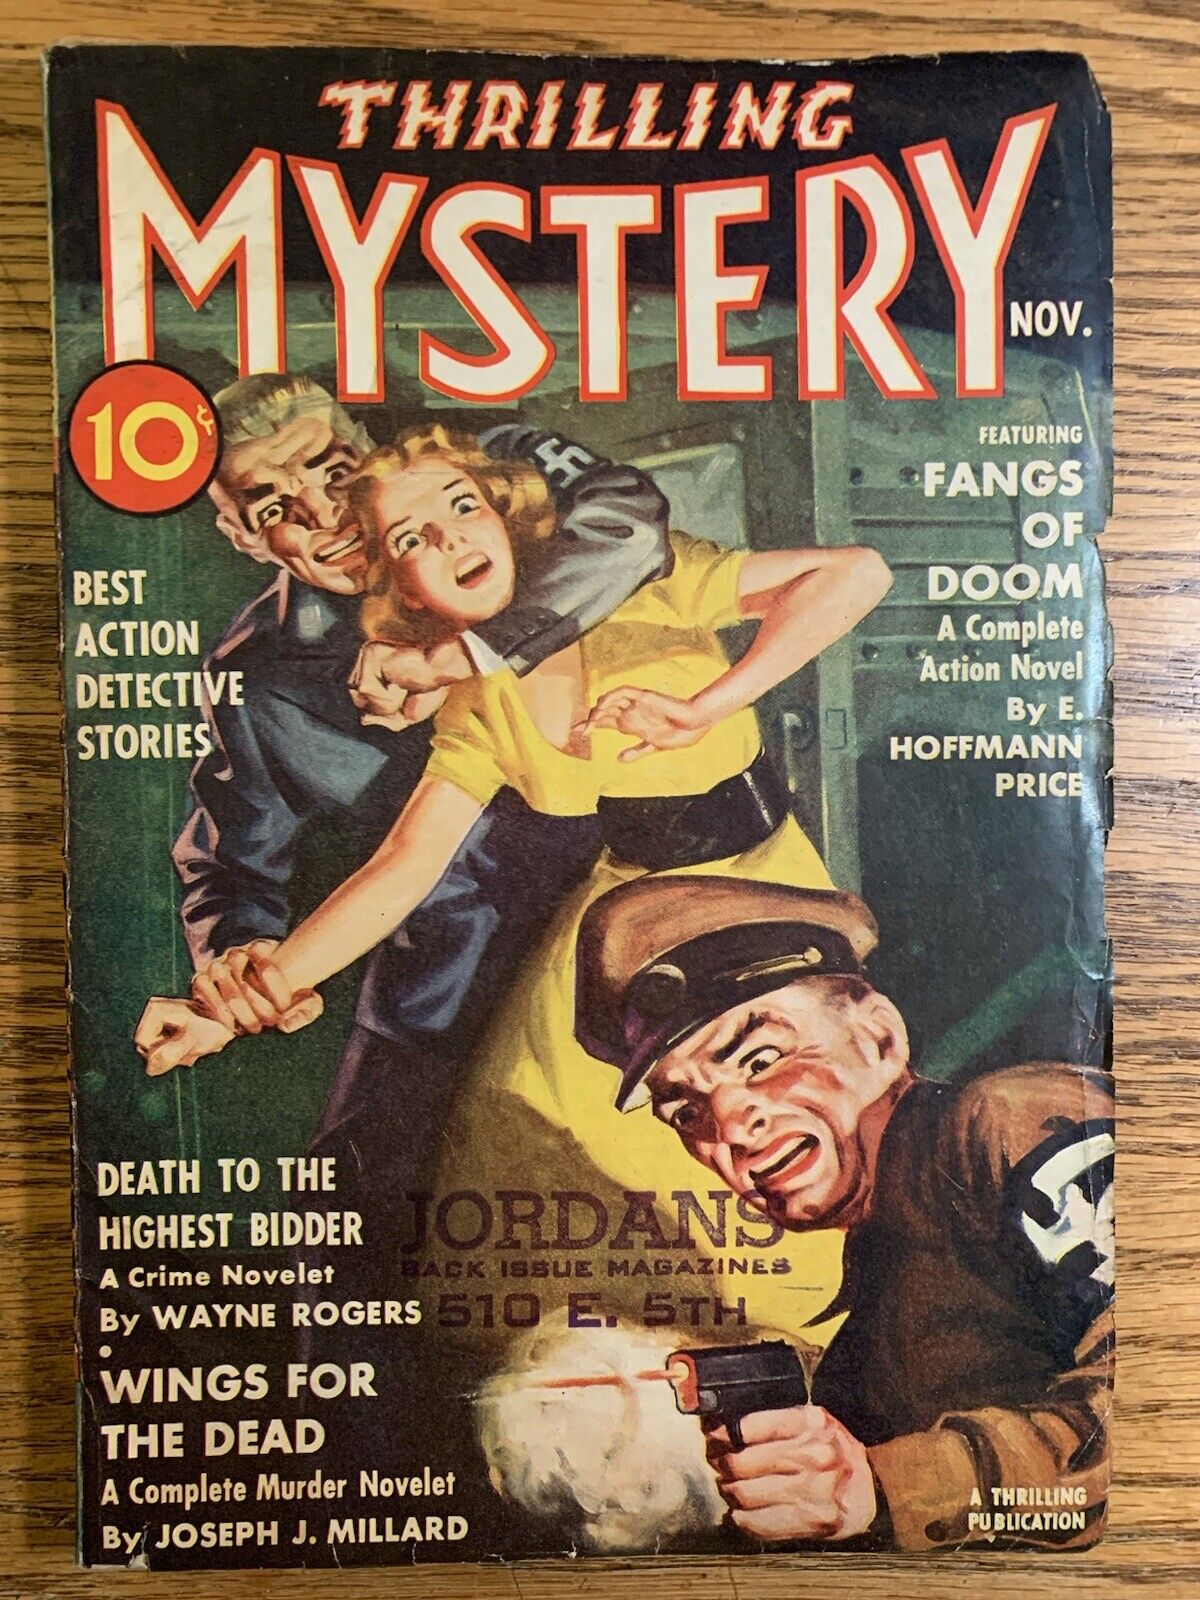 RARE November 1941 THRILLING MYSTERY PULP Classic Cover HIGH GRADE